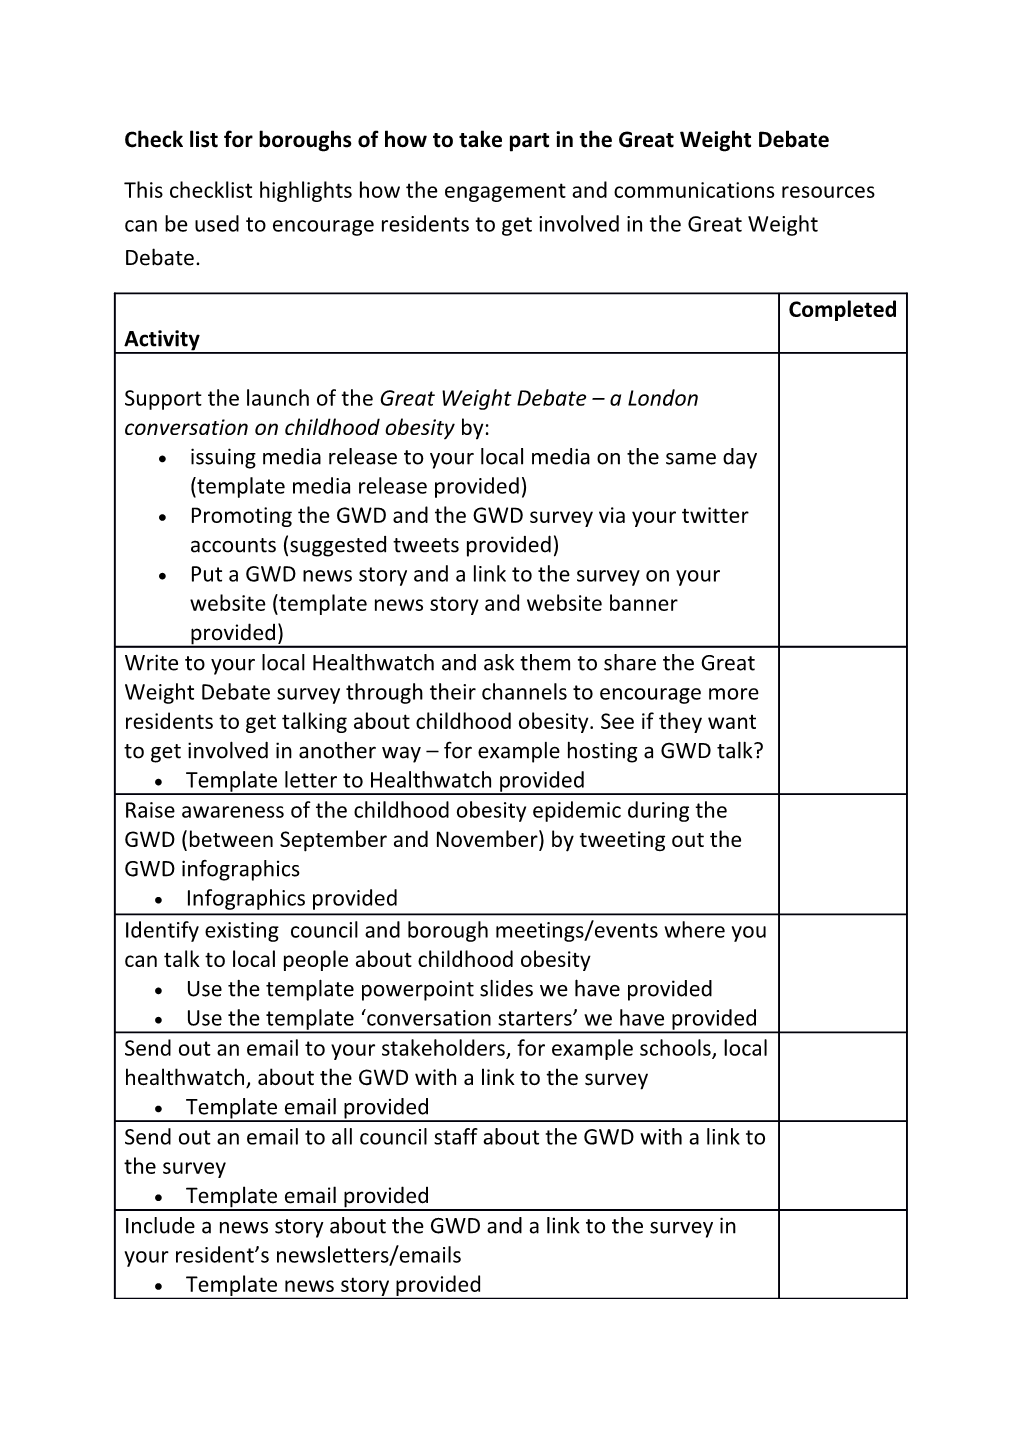 Check List for Boroughs of How to Take Part in the Great Weight Debate